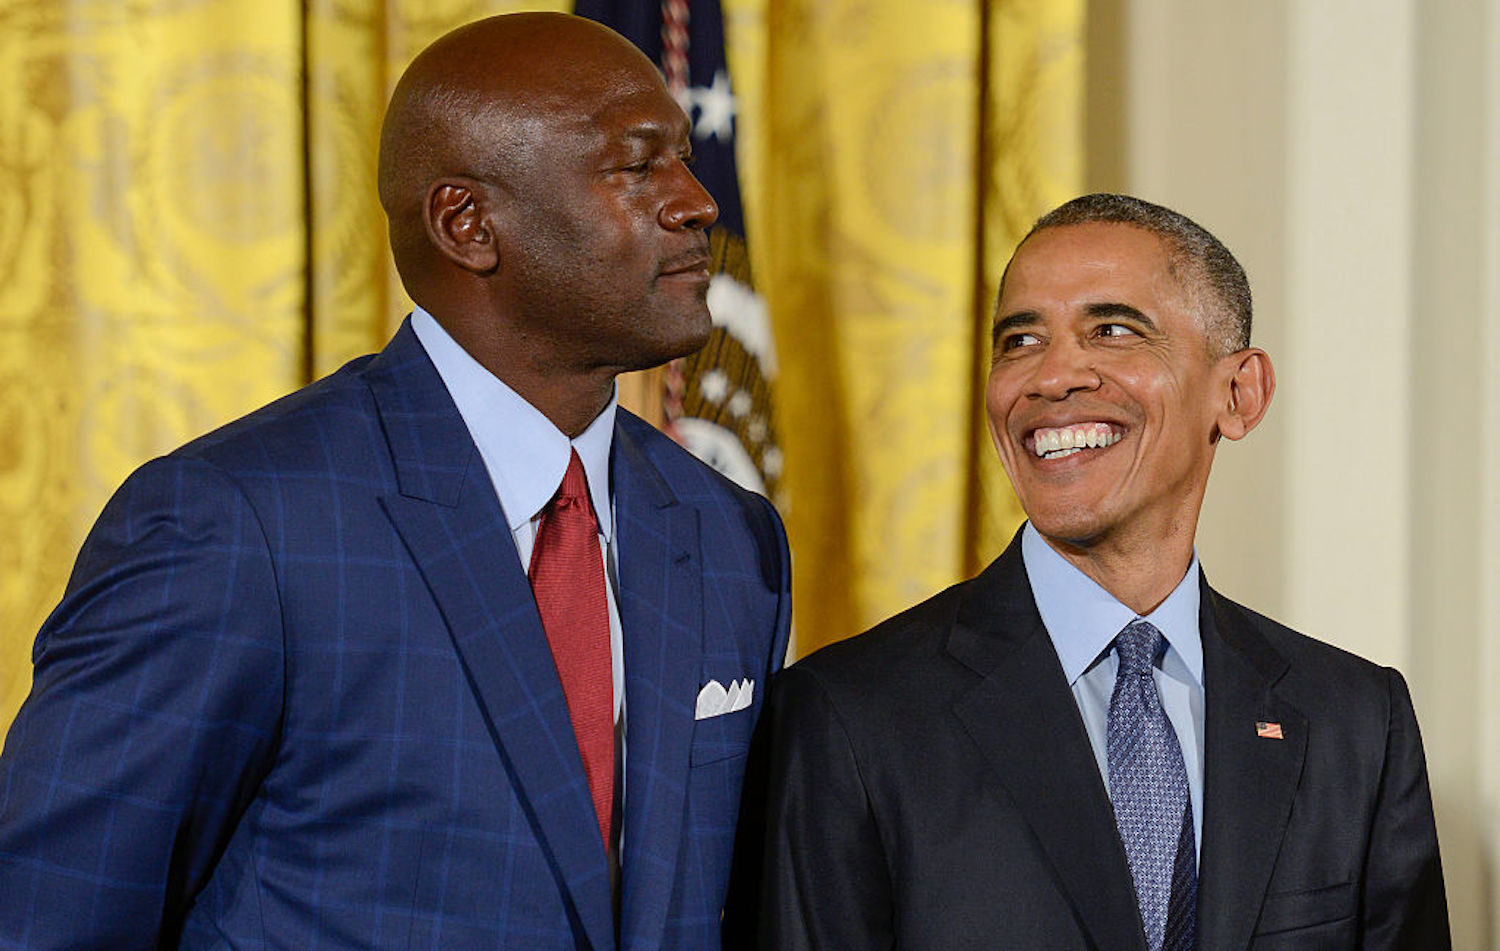 Every basketball fan has their own take on the NBA GOAT debate, even Barack Obama. The former president recently cast his vote for the greatest ever.